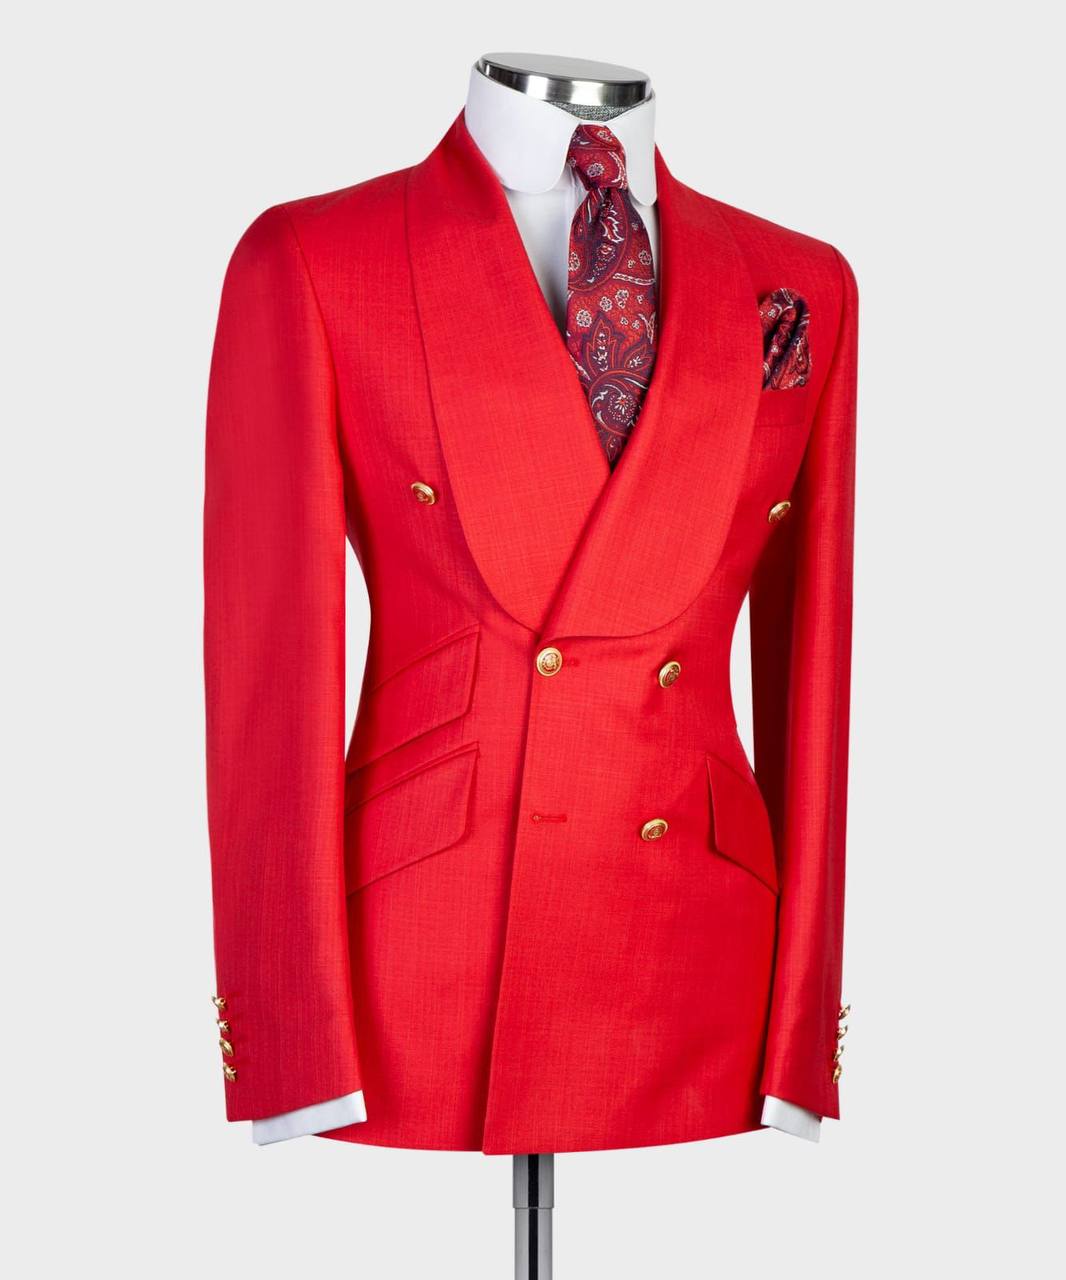 Men's 2 Piece Double Breasted Red Tuxedo Suit Shawl Lapel